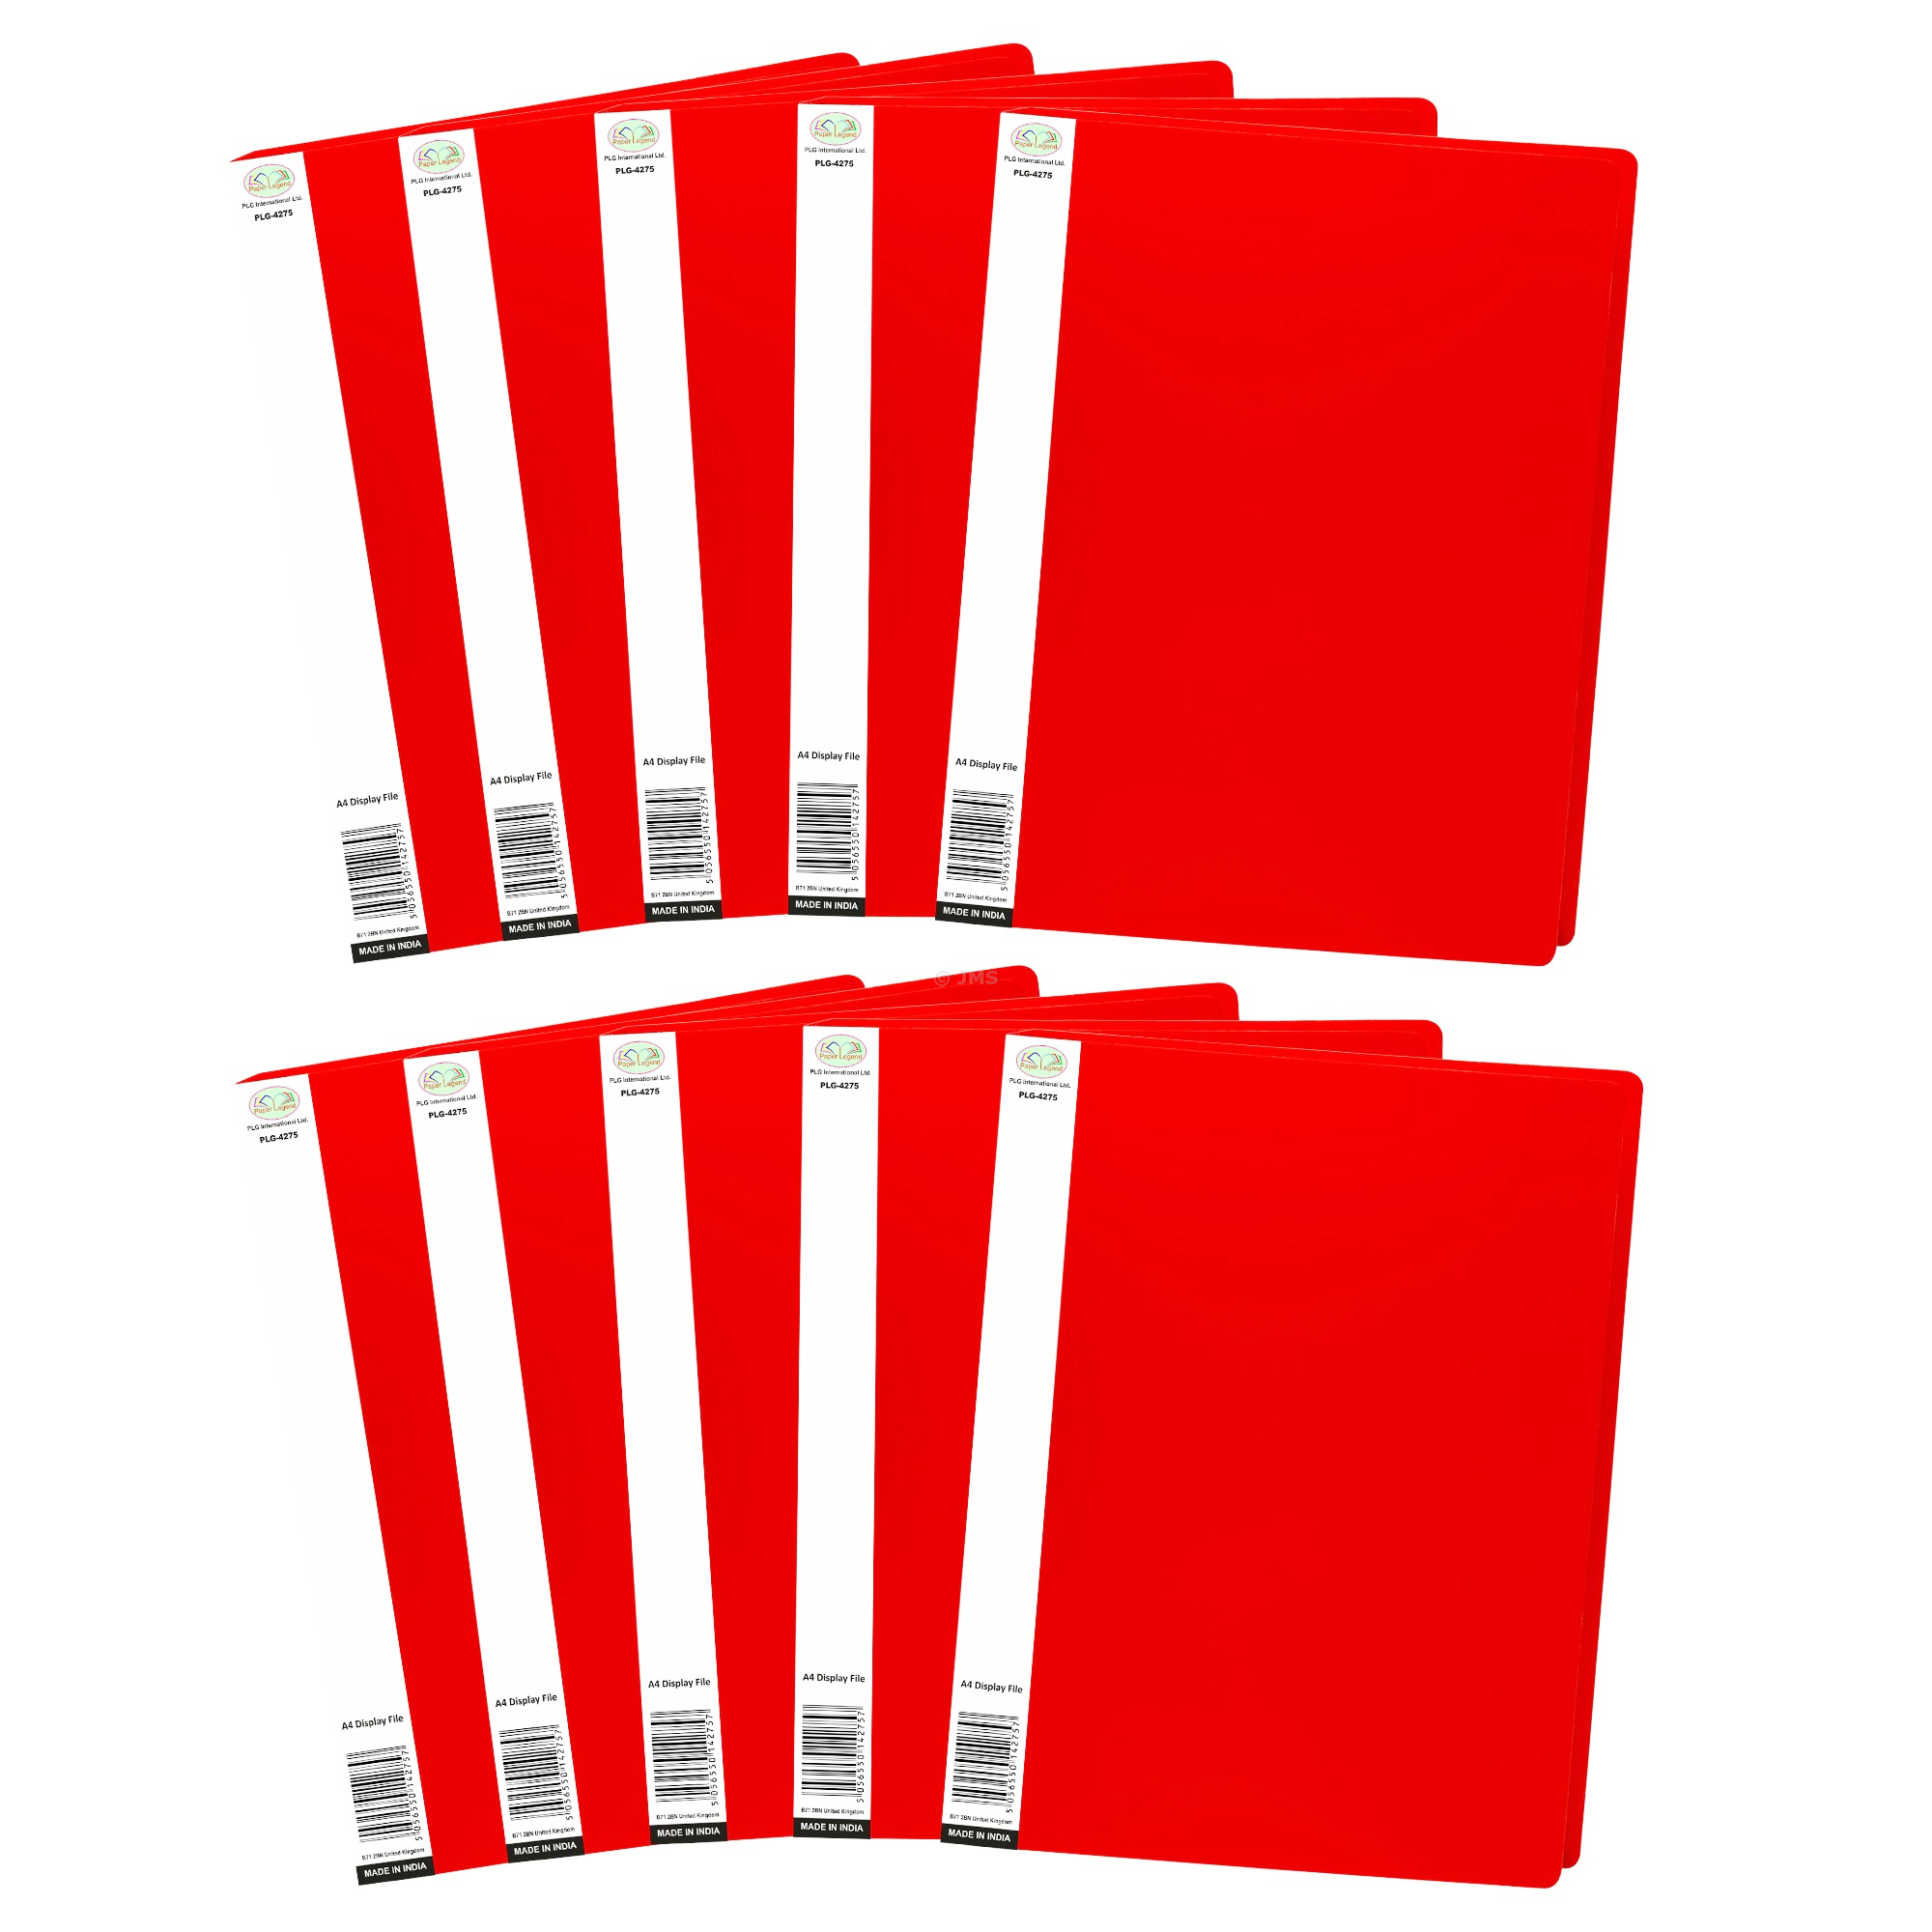 (Pack of 10) A4 Display Folders Portfolio Project Display Book with Plastic Sleeves Red 20 Pockets 40 View Page Poly Presentation Folder for Portfolios, Certificate, Document, Paperwork Organiser Holder Case